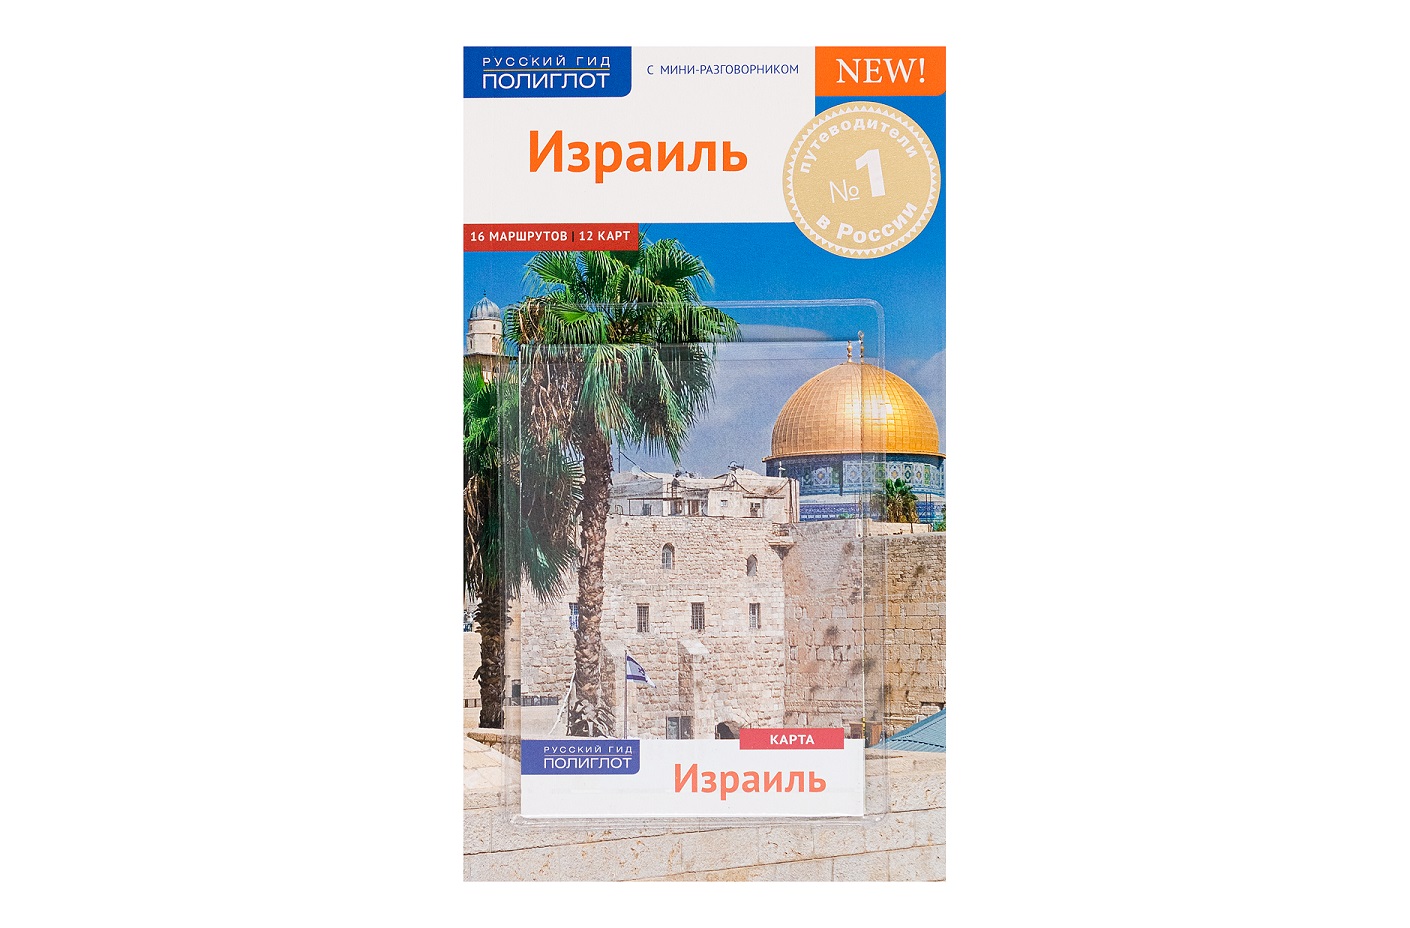 Vacation in israel? trip planner with attractions and itineraries